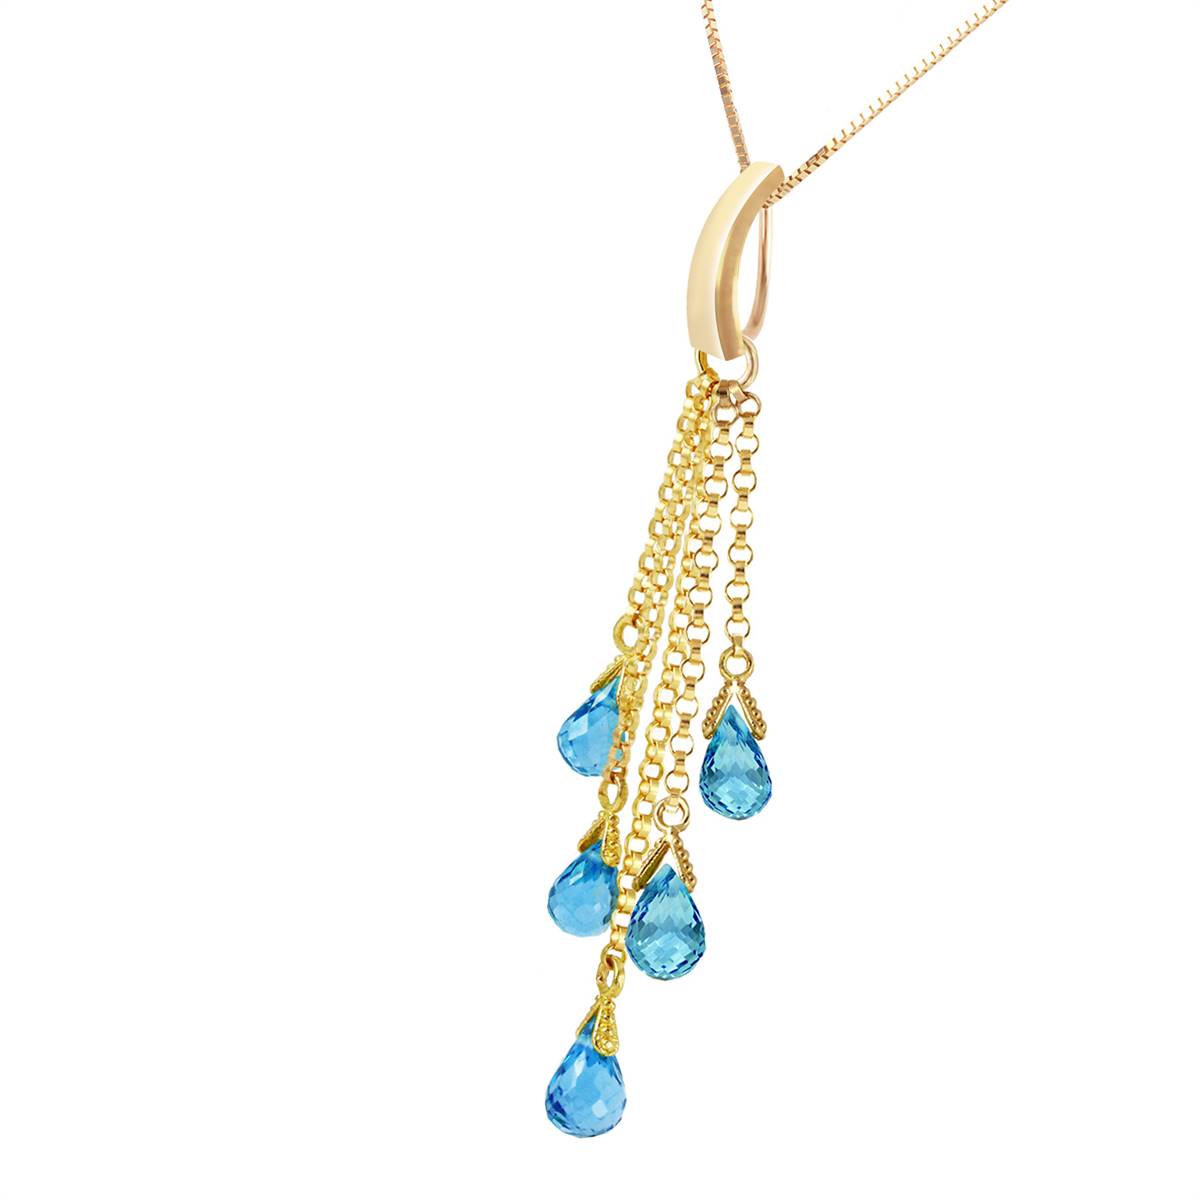 5.8 Carat 14K Solid Yellow Gold Upper East Side Blue Topaz Necklace